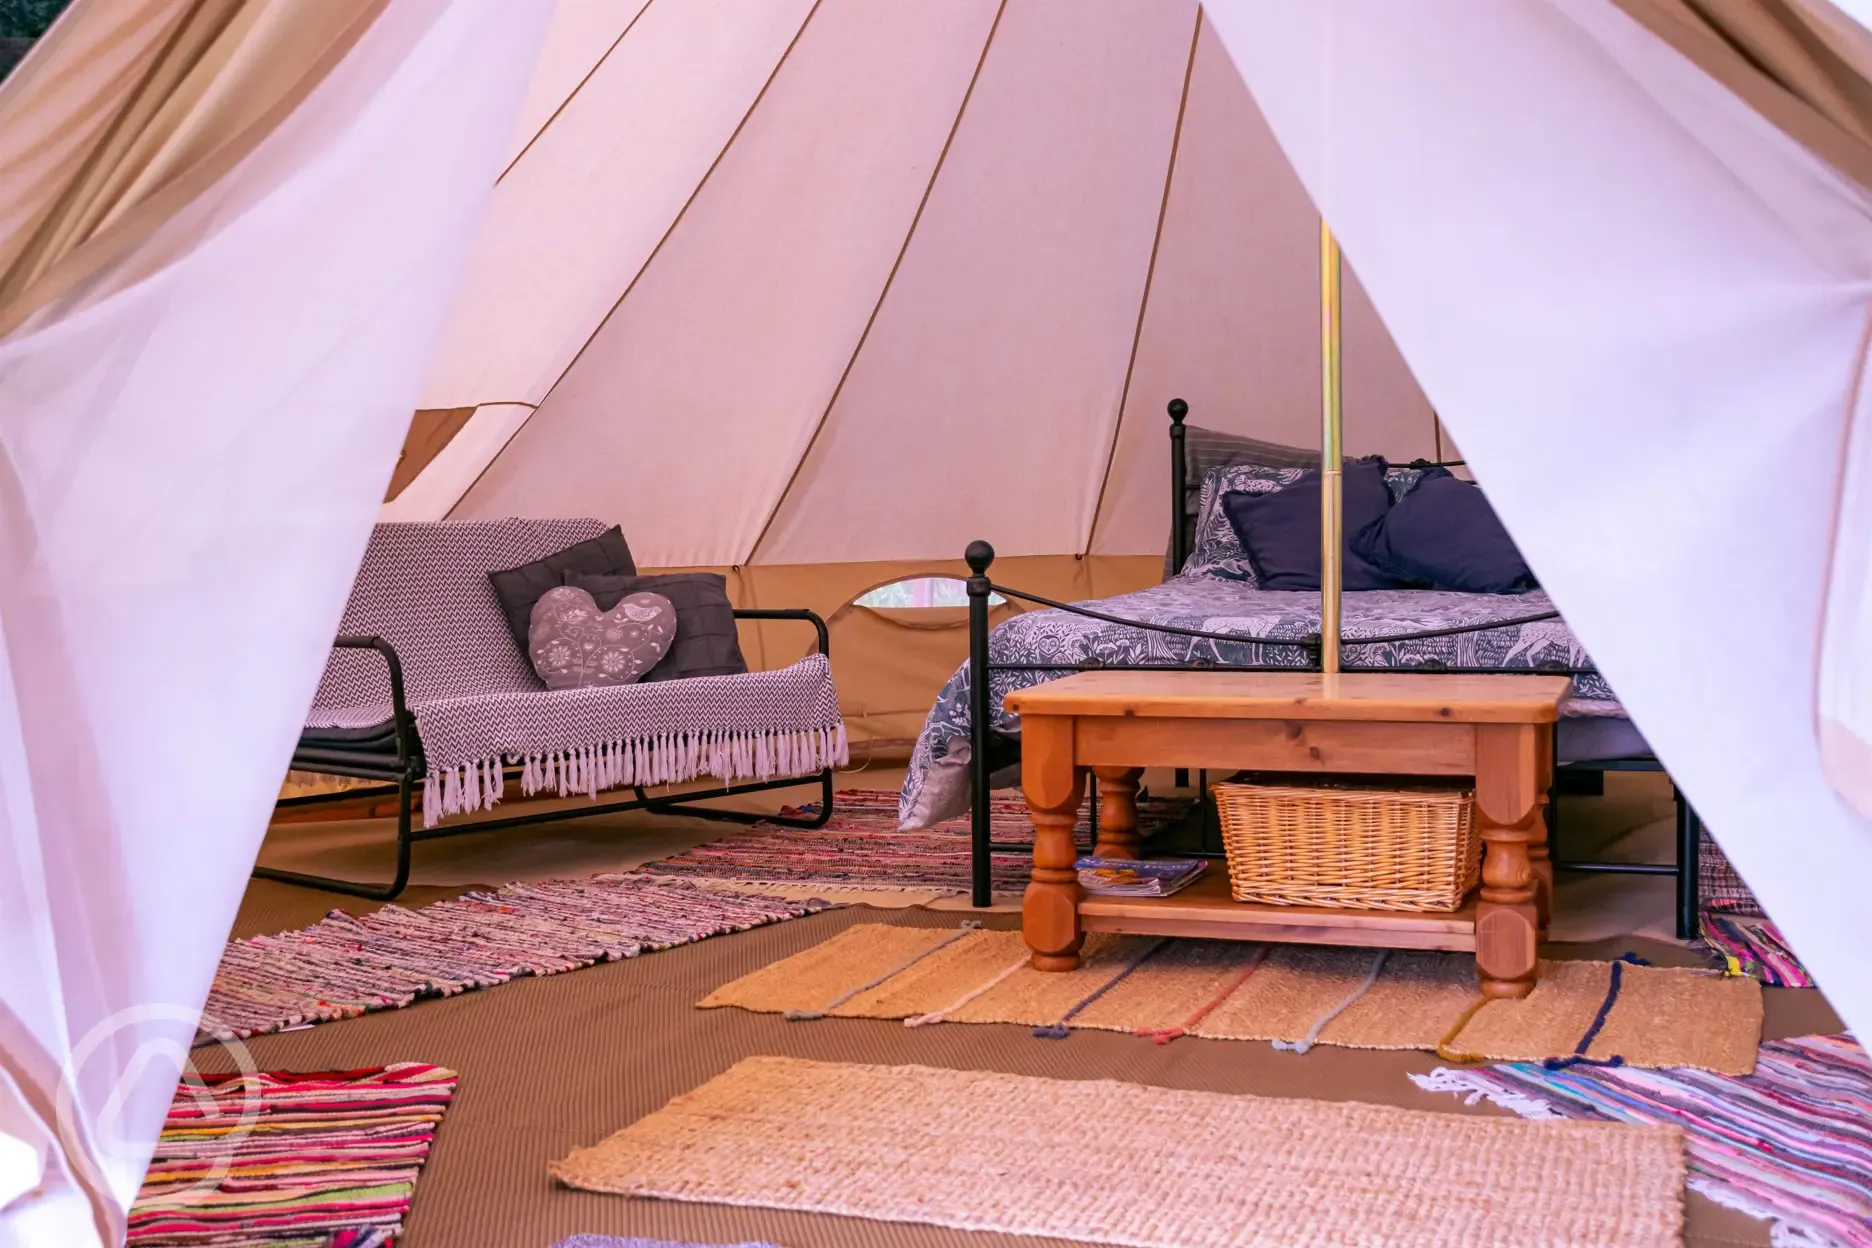 super spacious tents with simple furnishing and proper bed!